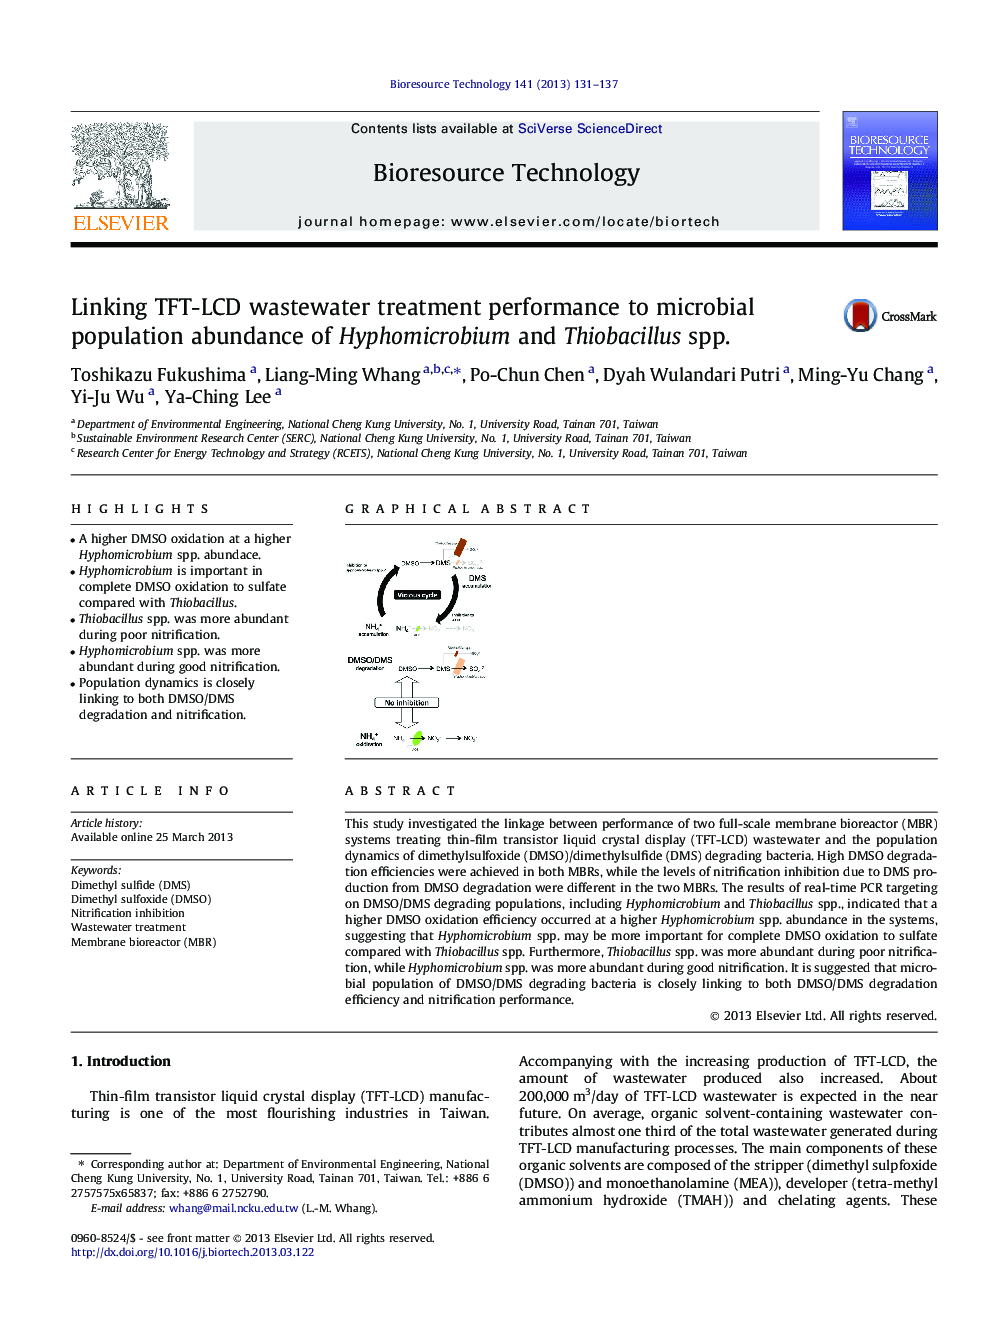 Linking TFT-LCD wastewater treatment performance to microbial population abundance of Hyphomicrobium and Thiobacillus spp.